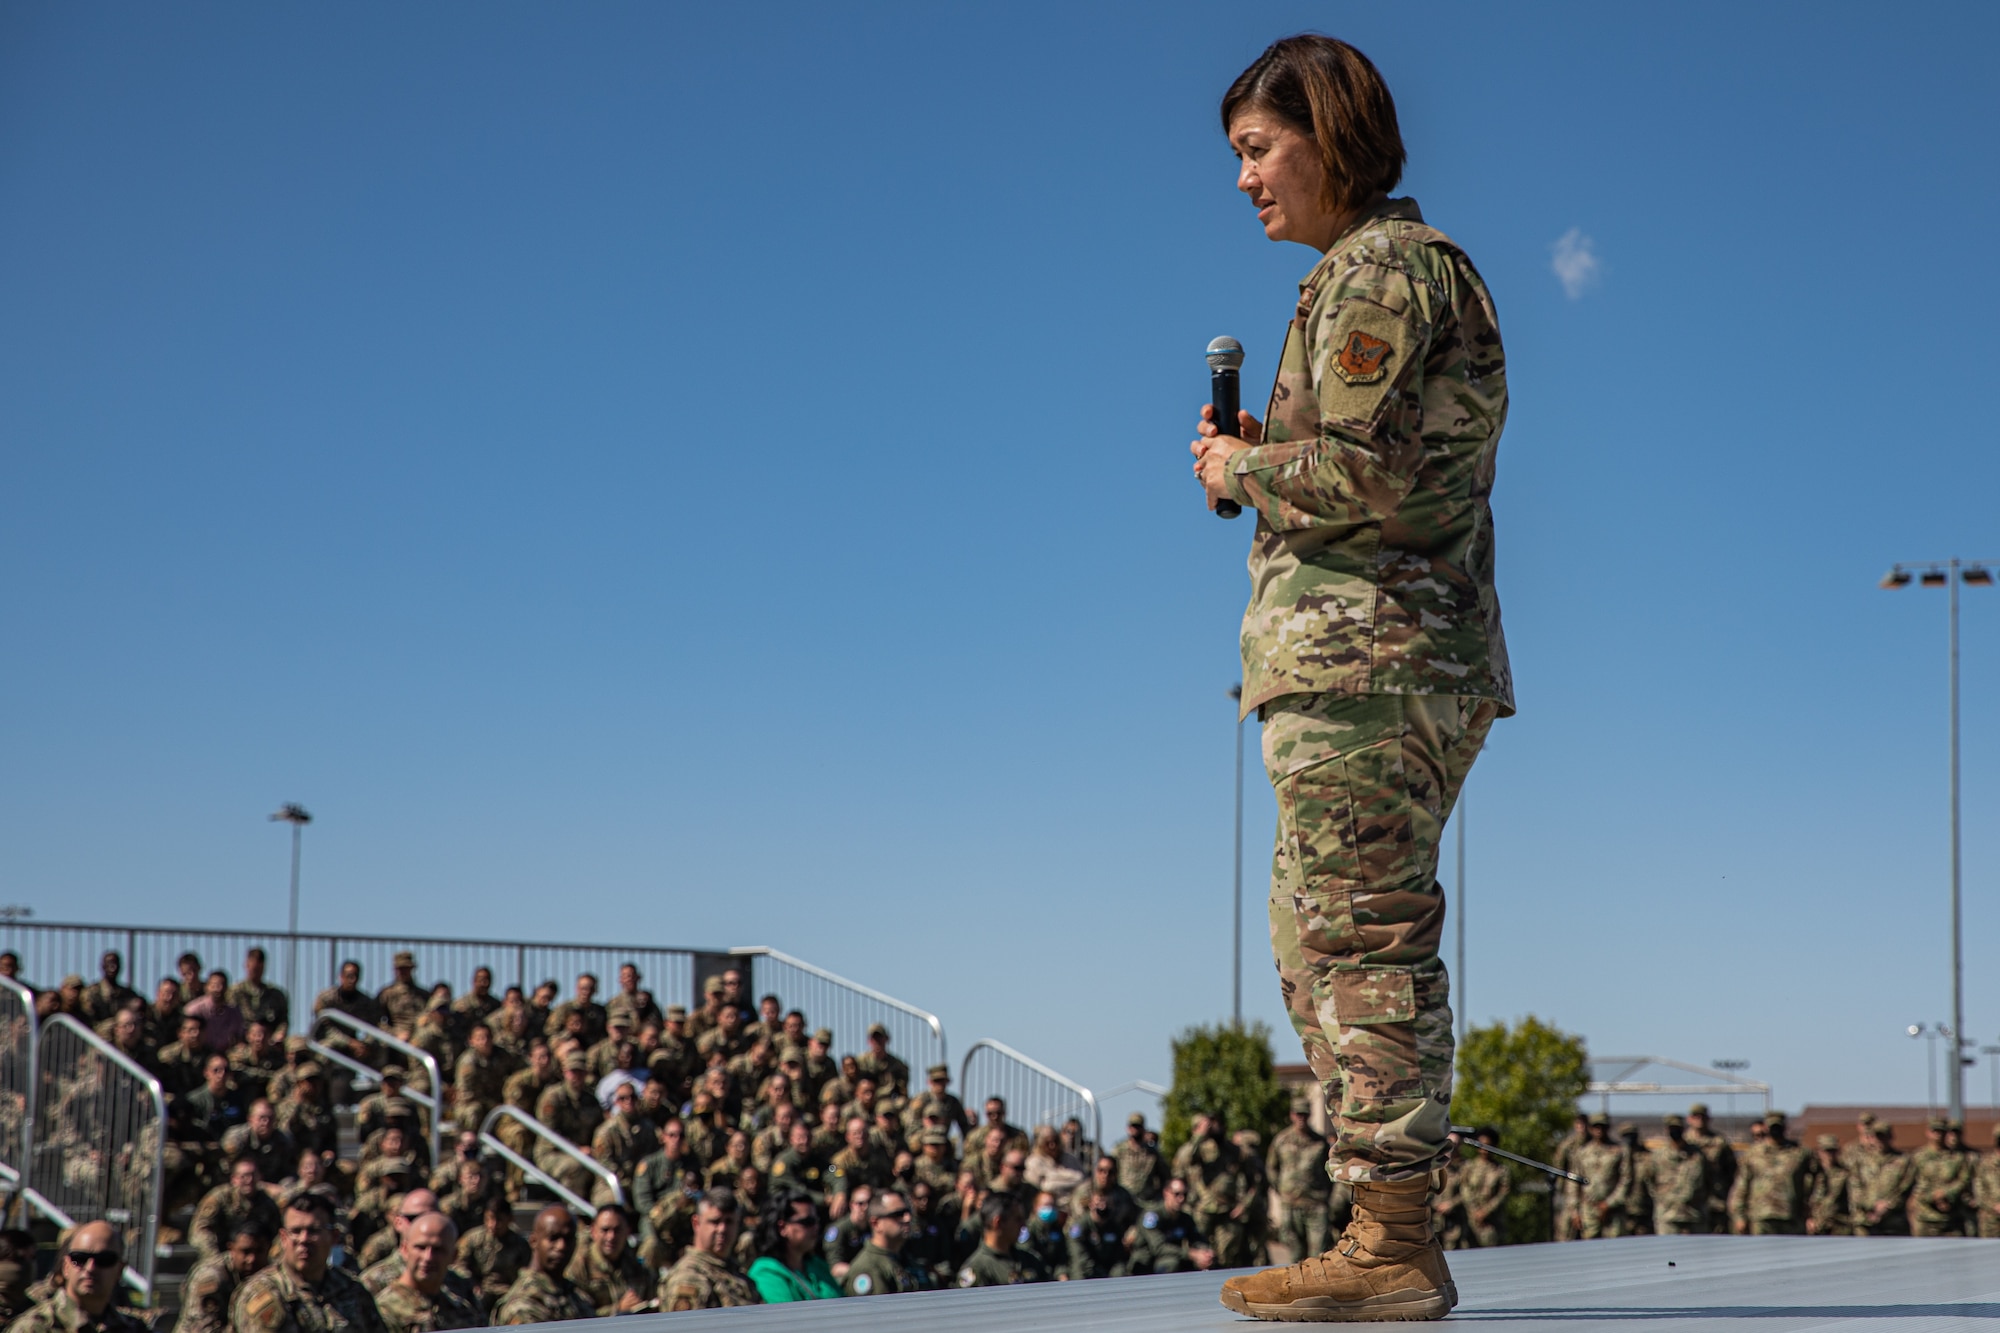 Chief Master Sgt. of the Air Force JoAnne S. Bass addresses Task Force-Holloman and 49th Wing Airmen and Guardians during an all call as part of a visit to Holloman Air Force Base, New Mexico, Oct. 13, 2021. The Department of Defense, through U.S. Northern Command, and in support of the Department of Homeland Security, is providing transportation, temporary housing, medical screening, and general support for at least 50,000 Afghan evacuees at suitable facilities, in permanent or temporary structures, as quickly as possible. This initiative provides Afghan personnel essential support at secure locations outside Afghanistan. (U.S. Army photo by Pfc. Anthony Sanchez)